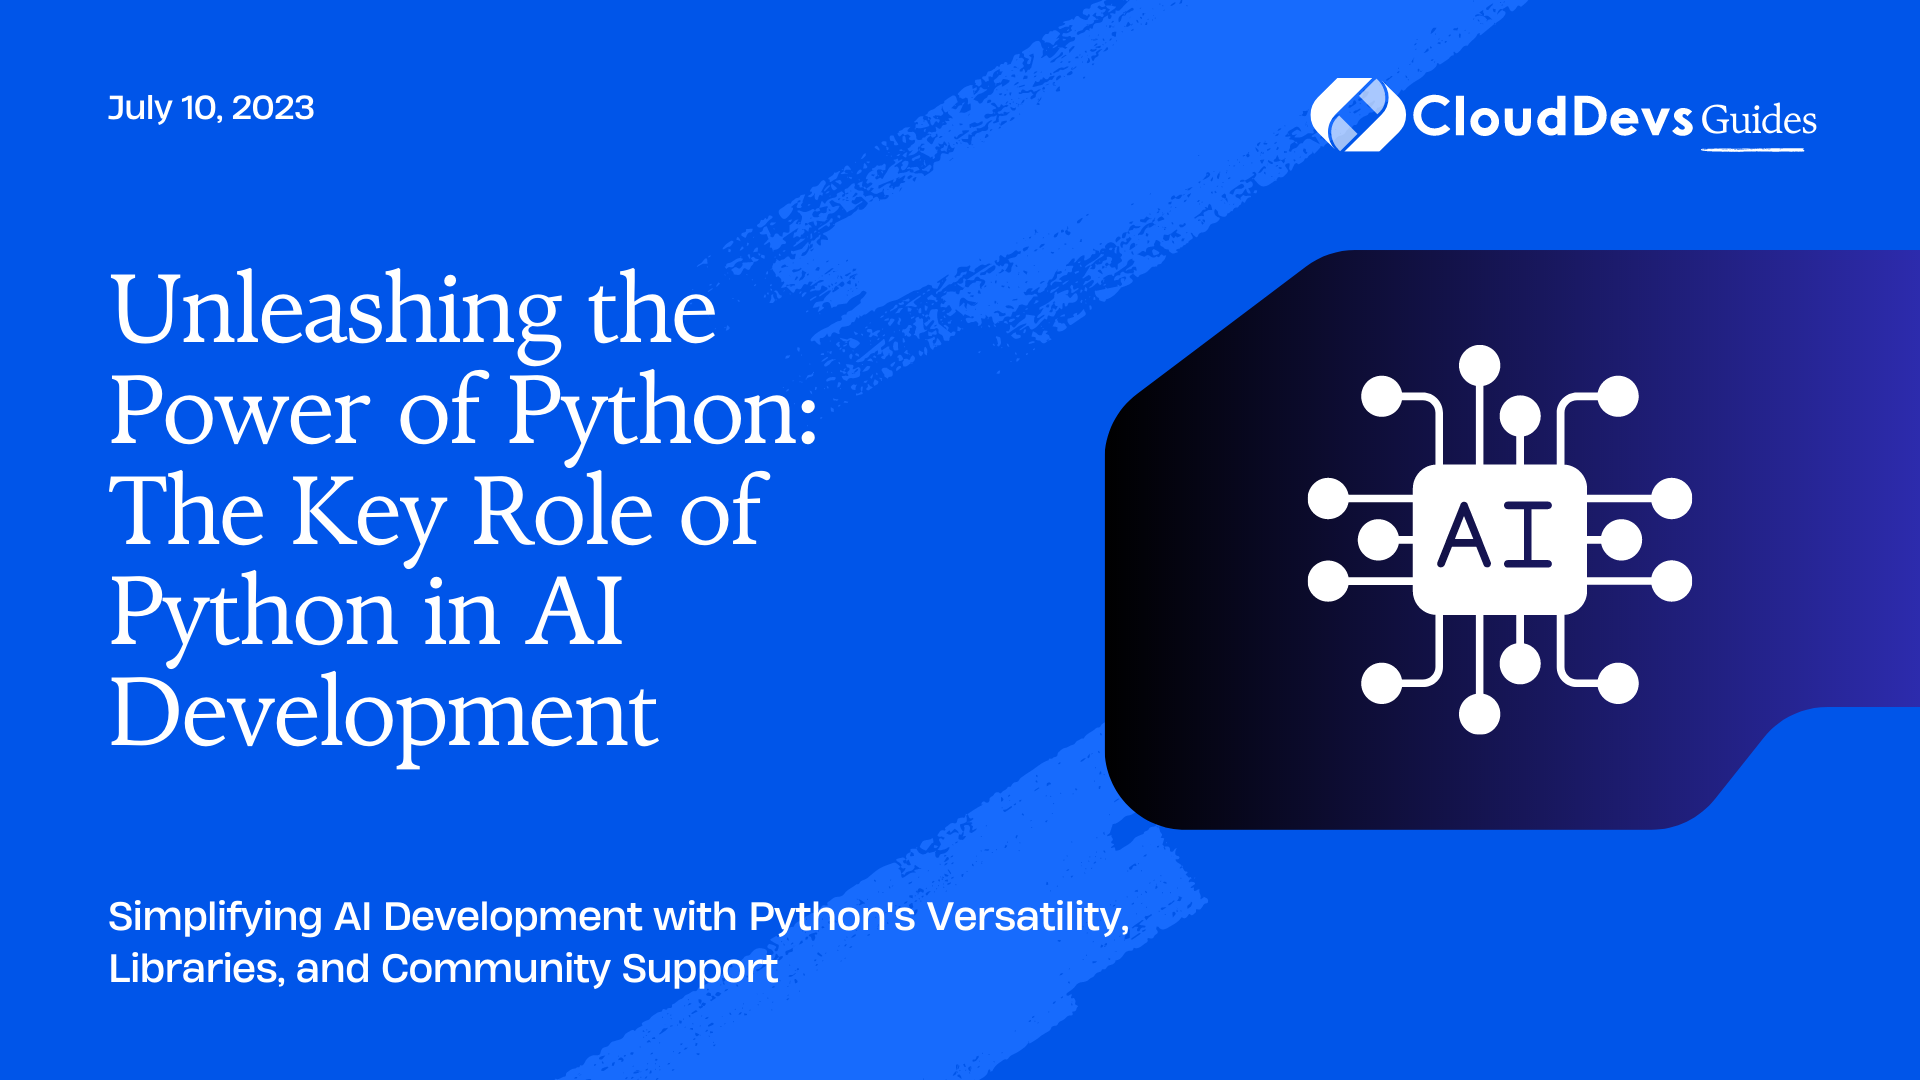 Unleashing the Power of Python: The Key Role of Python in AI Development